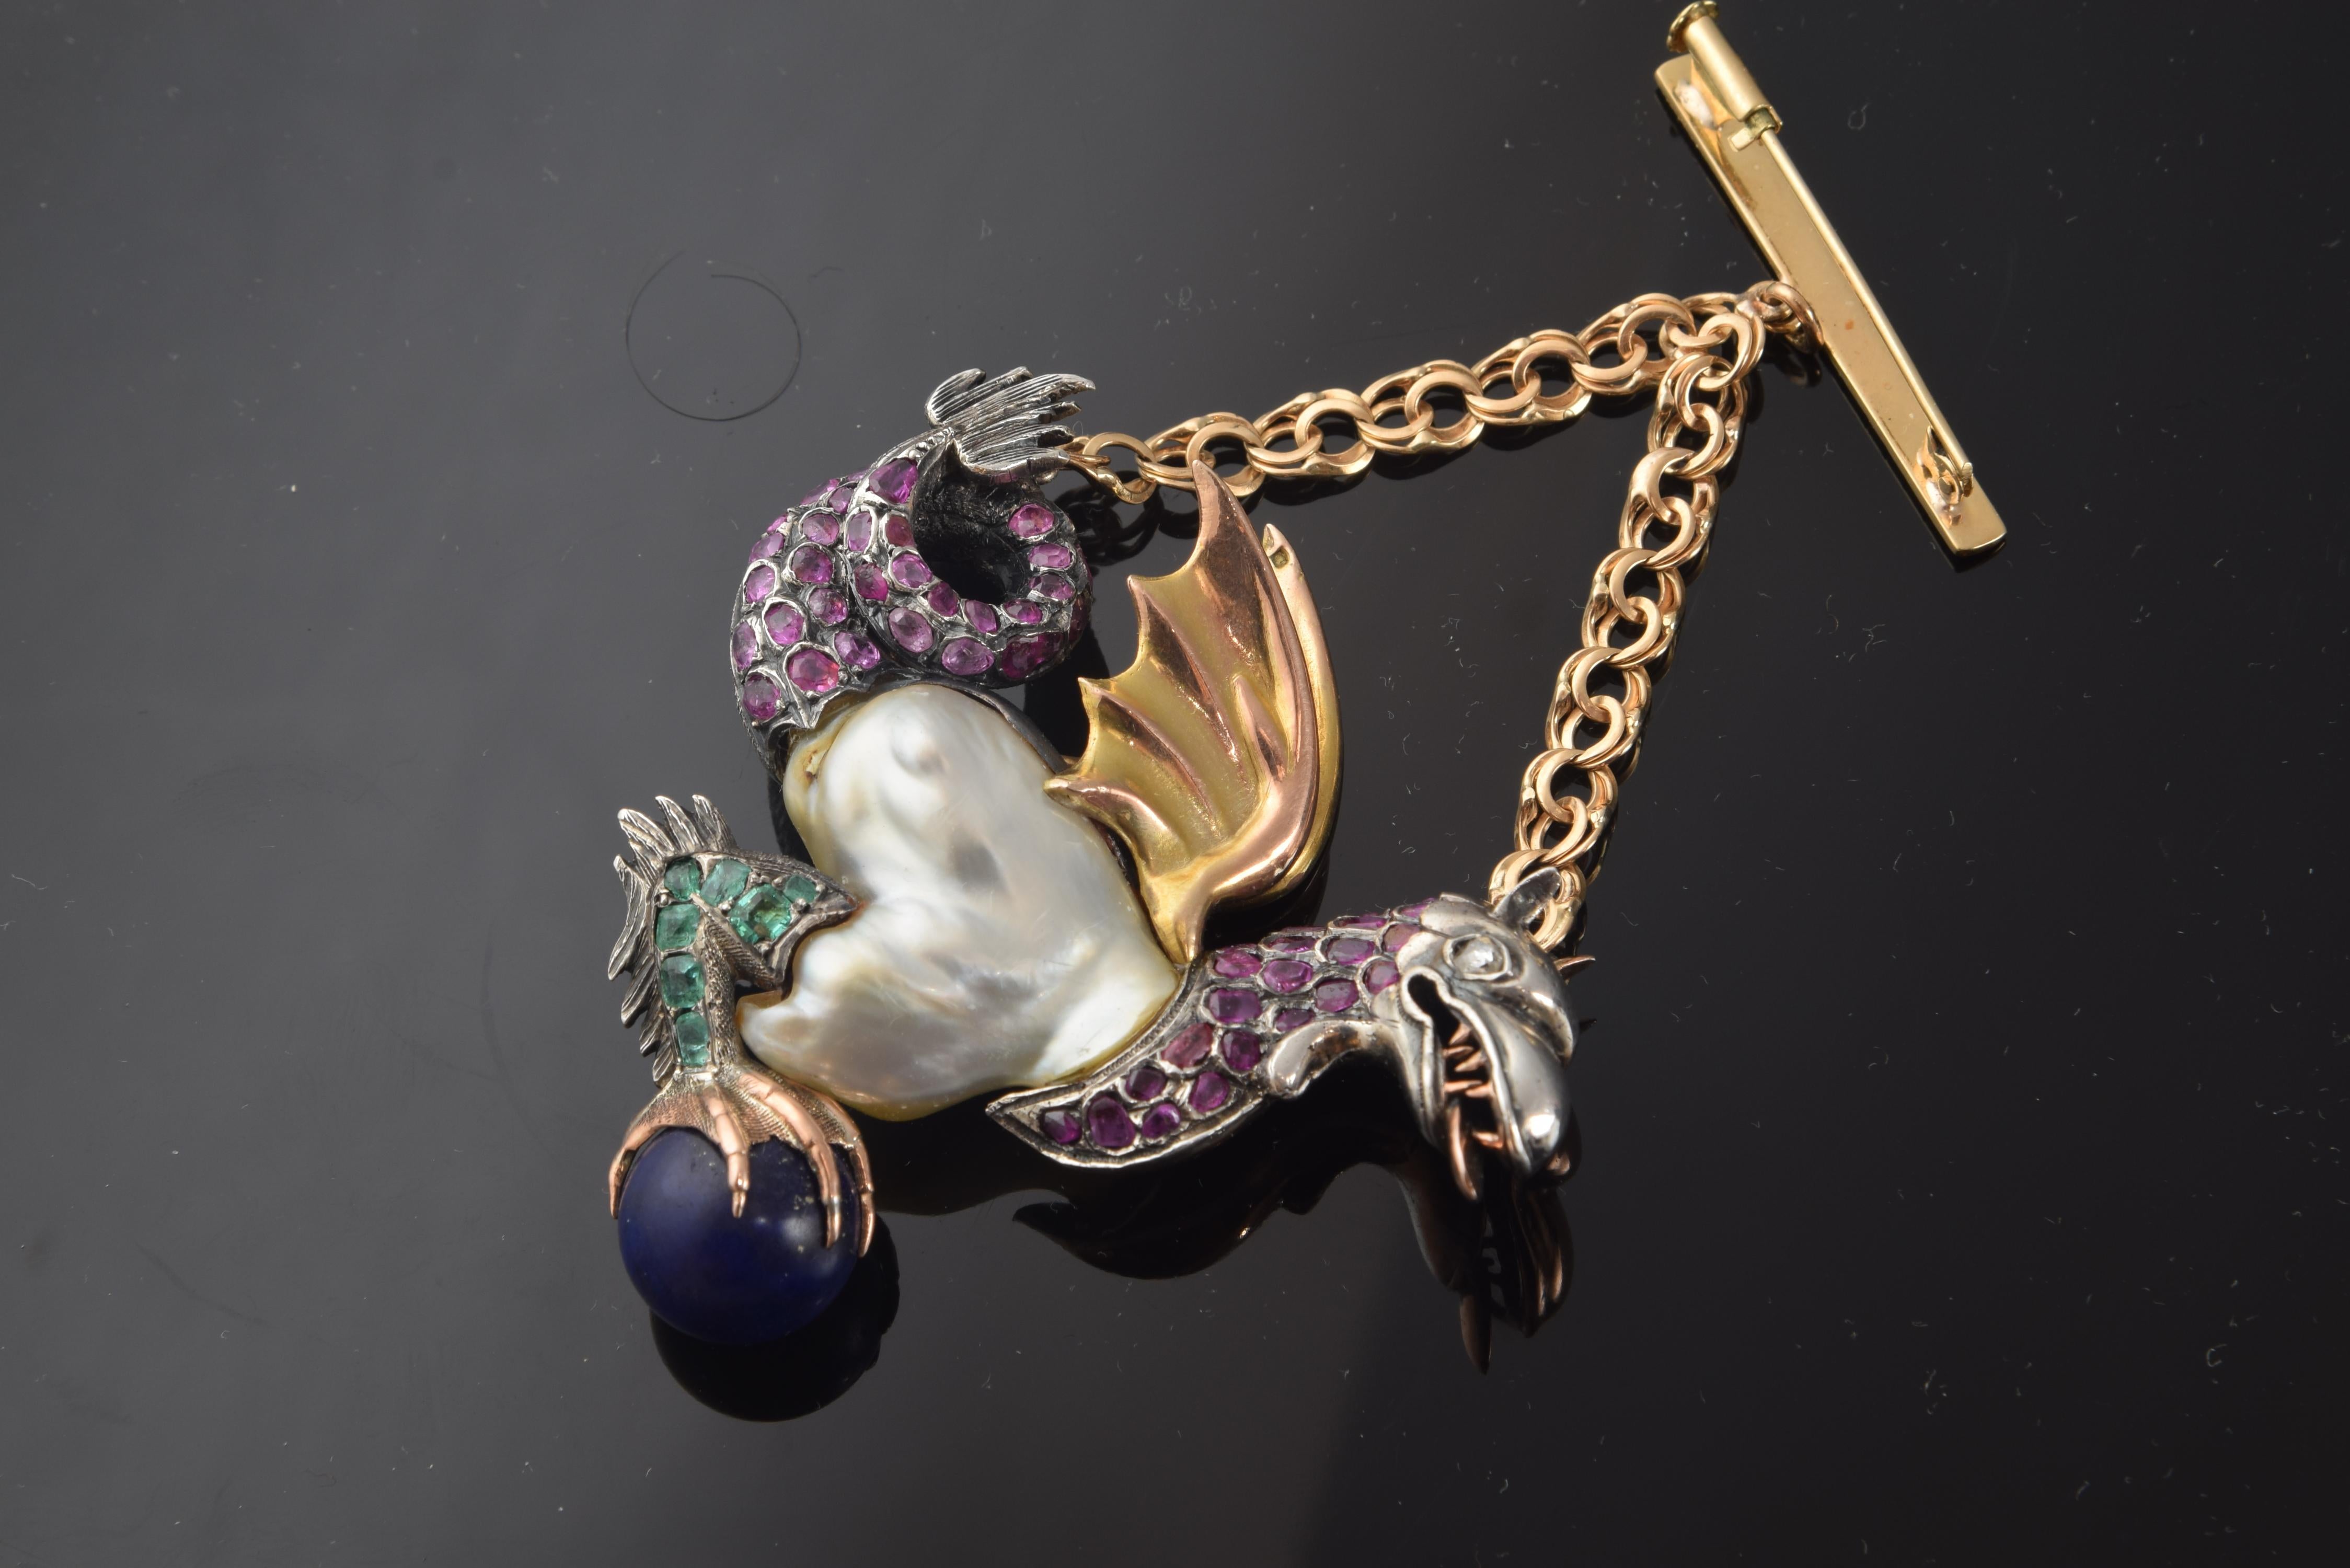 A chain attached to the dragon's head and tail keeps the brooch in its correct position. This one represents a dragon, with its tail curled and a Baroque pearl under its overwrought wings, making the body of the animal; He holds a blue sphere on his